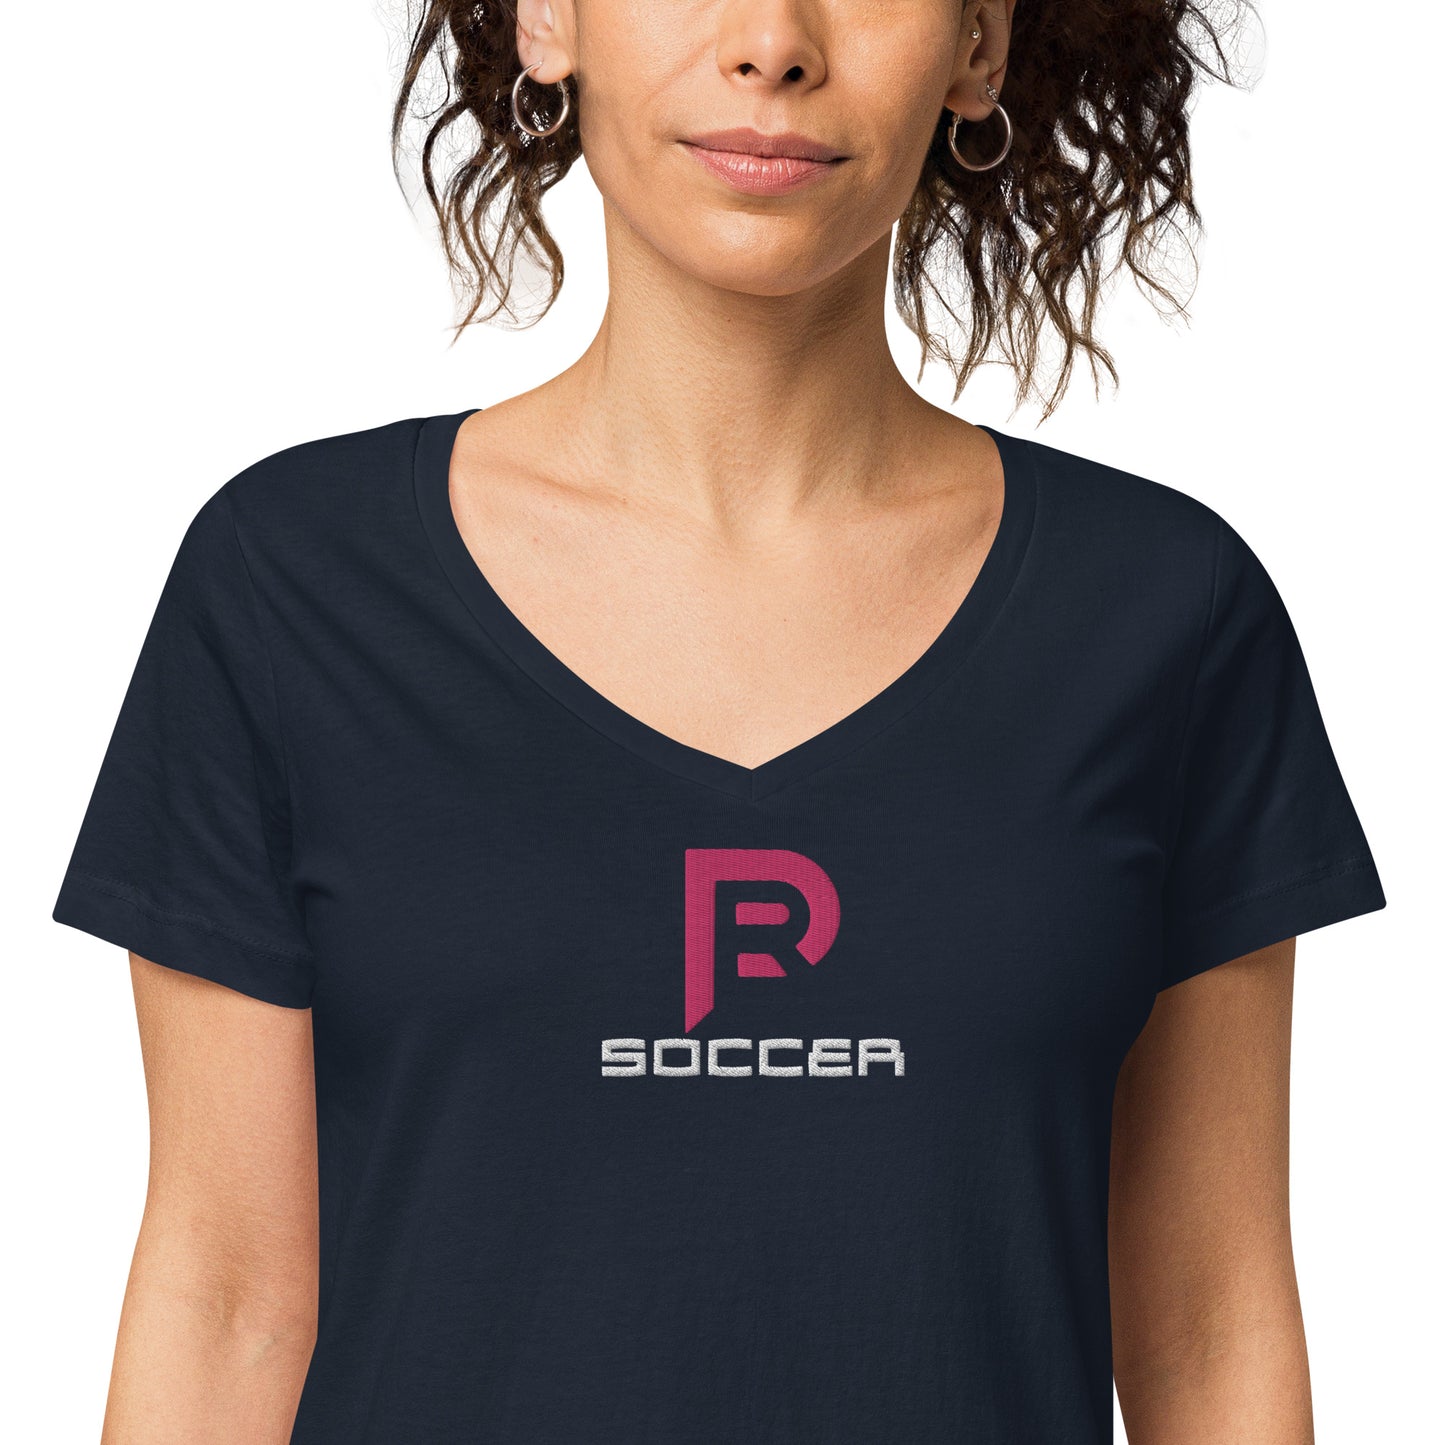 Red Weapon Soccer fitted v-neck t-shirt